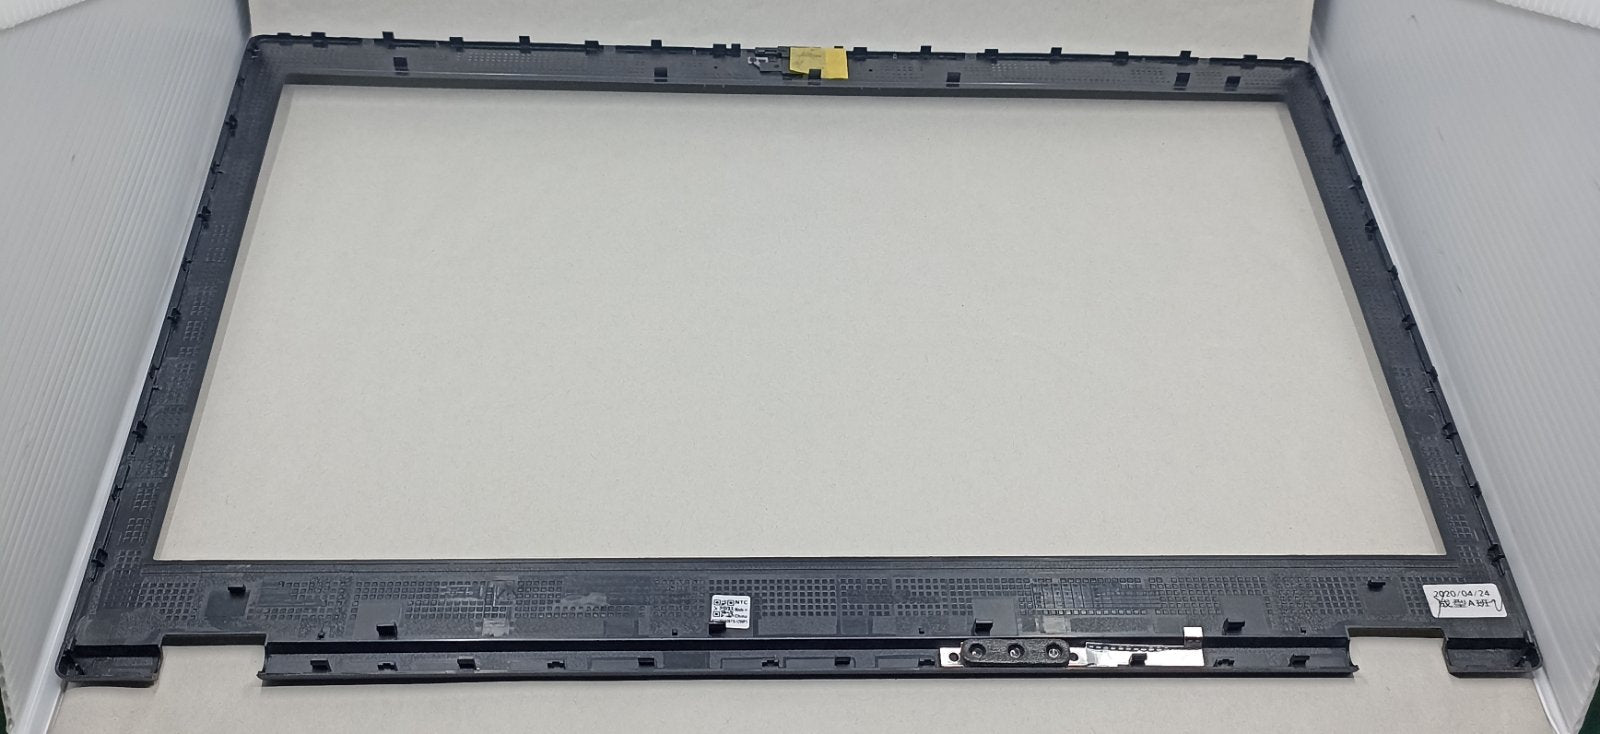 Replacement LCD Bezel For Lenovo P53 ThinkPad WL